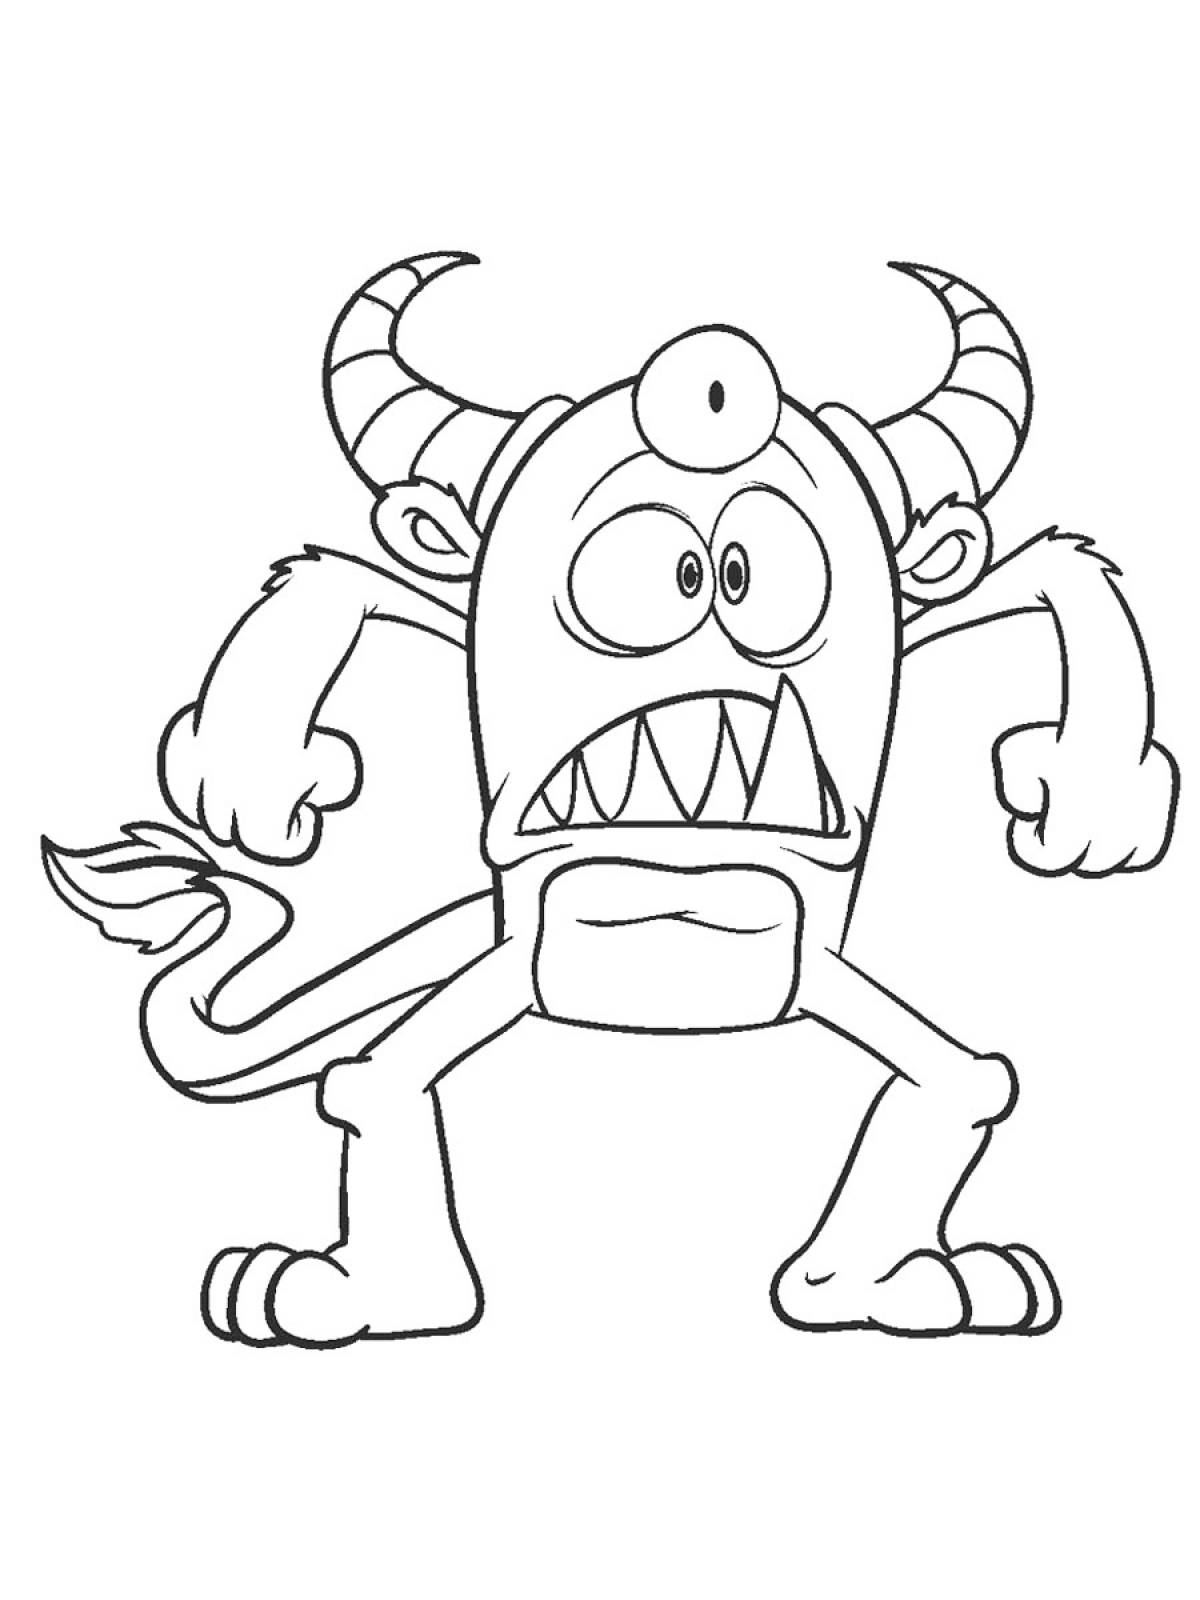 Coloring page hypnotic musical monsters